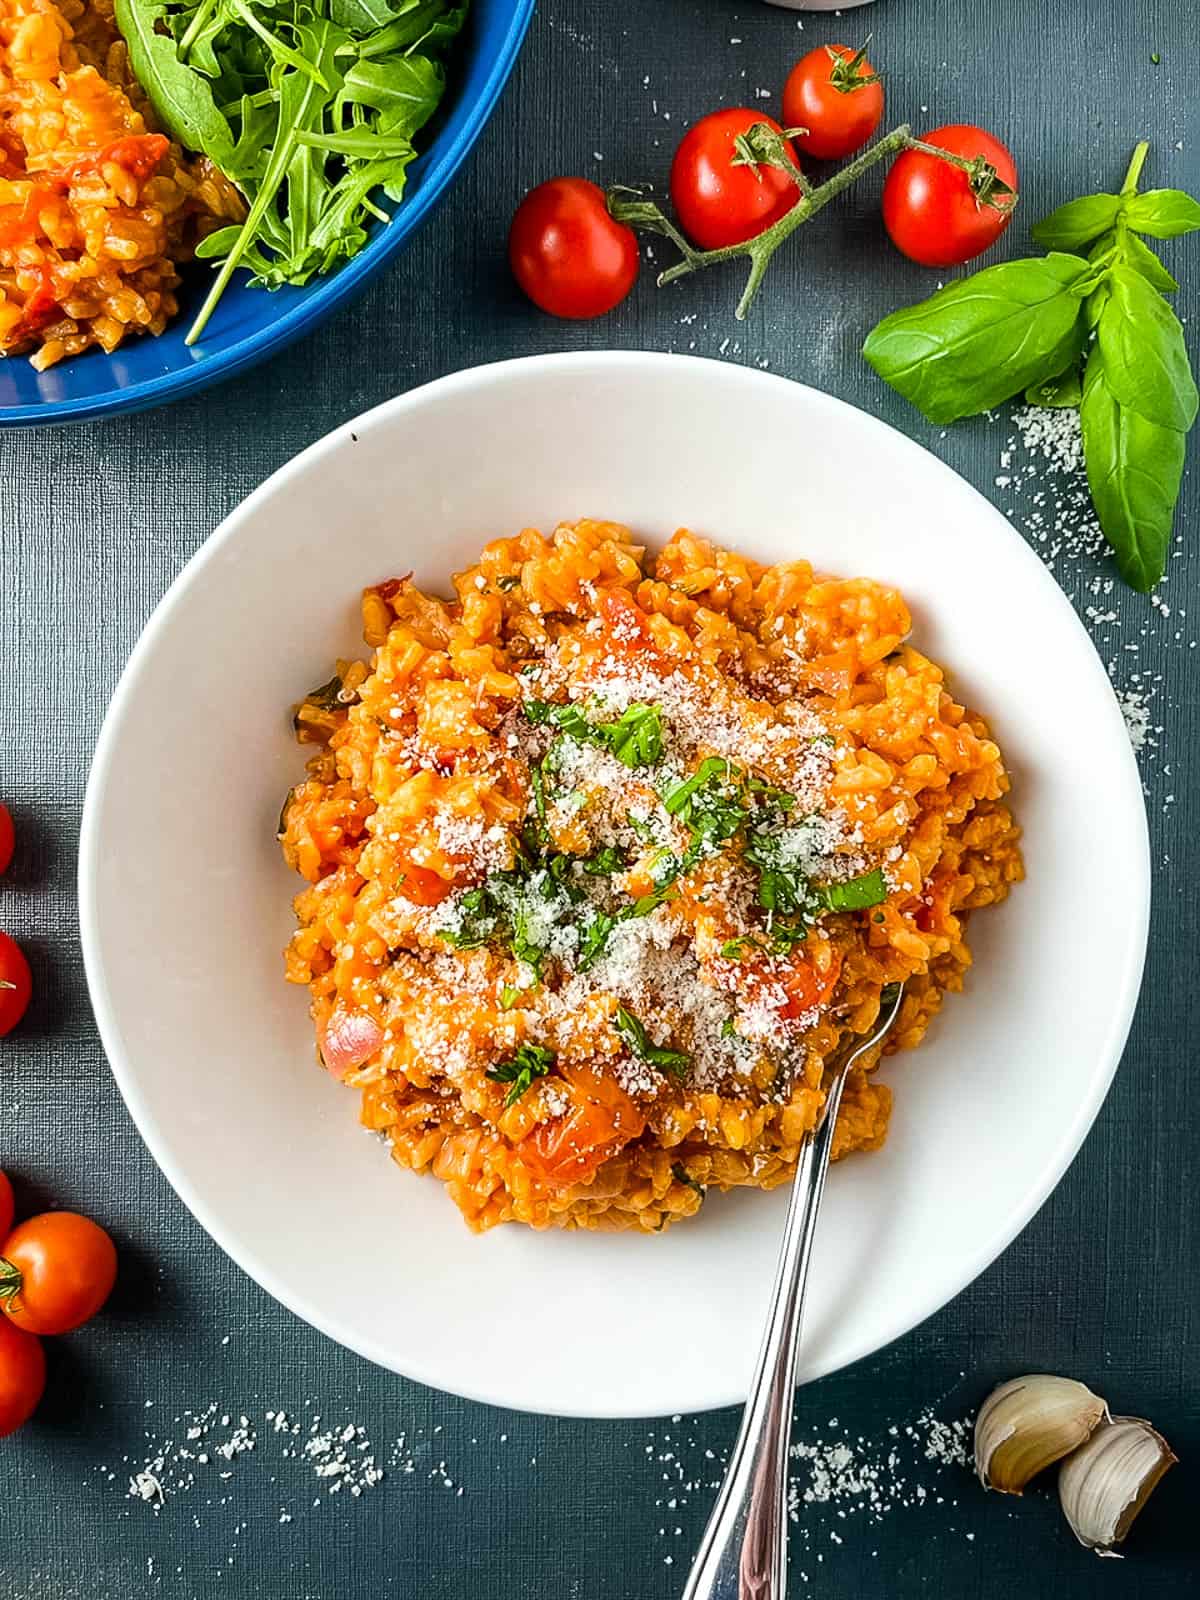 tomato and mascarpone risotto topped with parmesan cheese and fresh basil in bowl